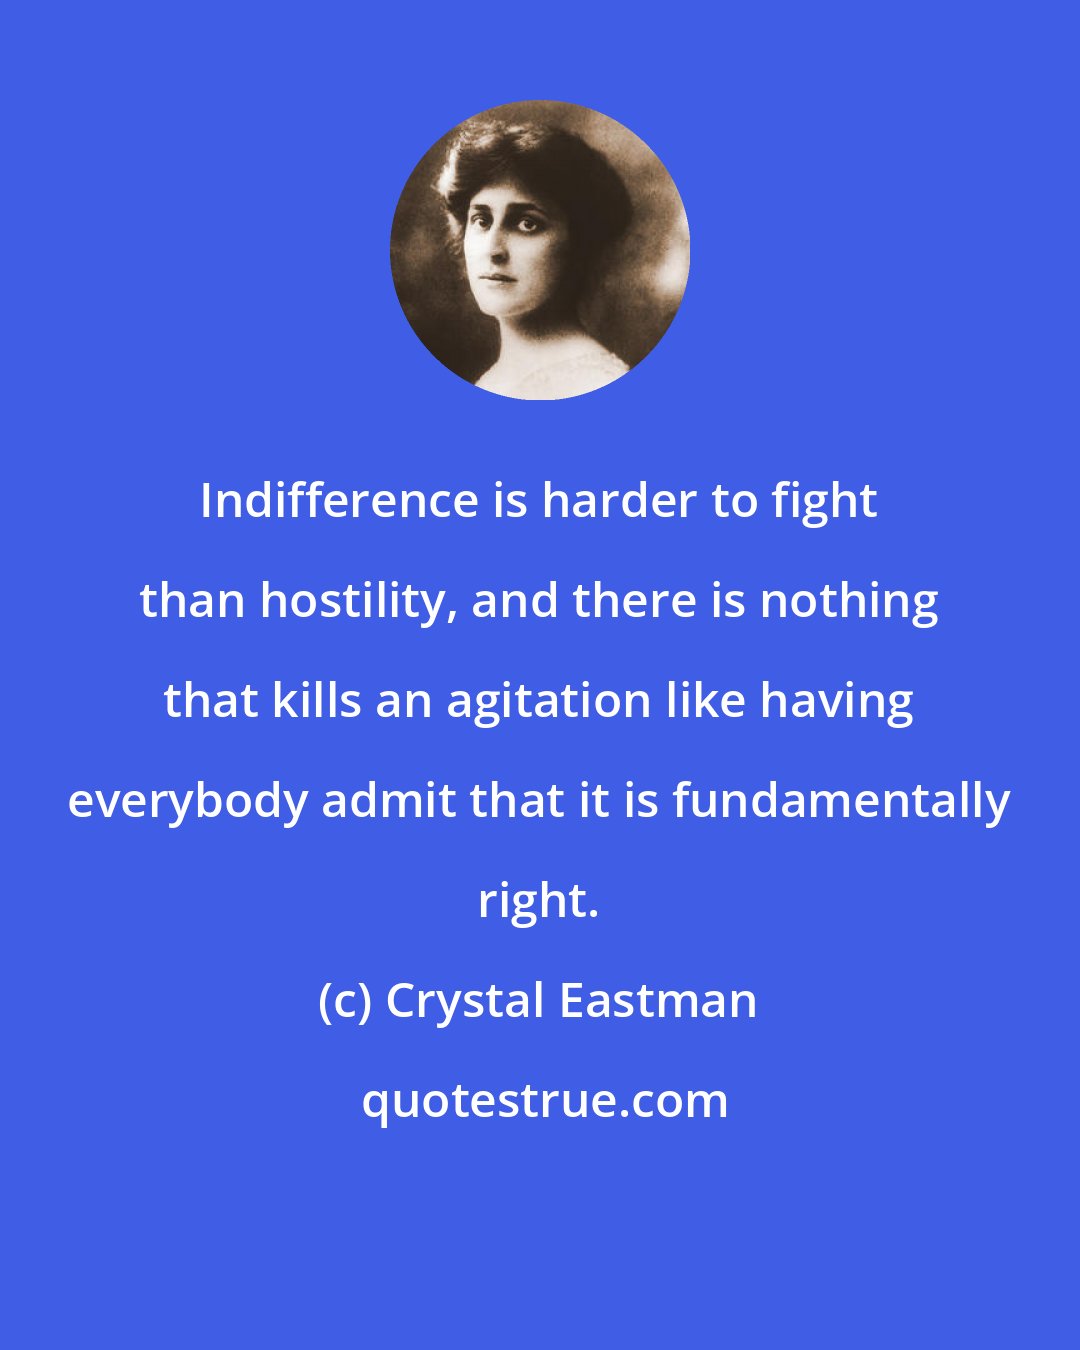 Crystal Eastman: Indifference is harder to fight than hostility, and there is nothing that kills an agitation like having everybody admit that it is fundamentally right.